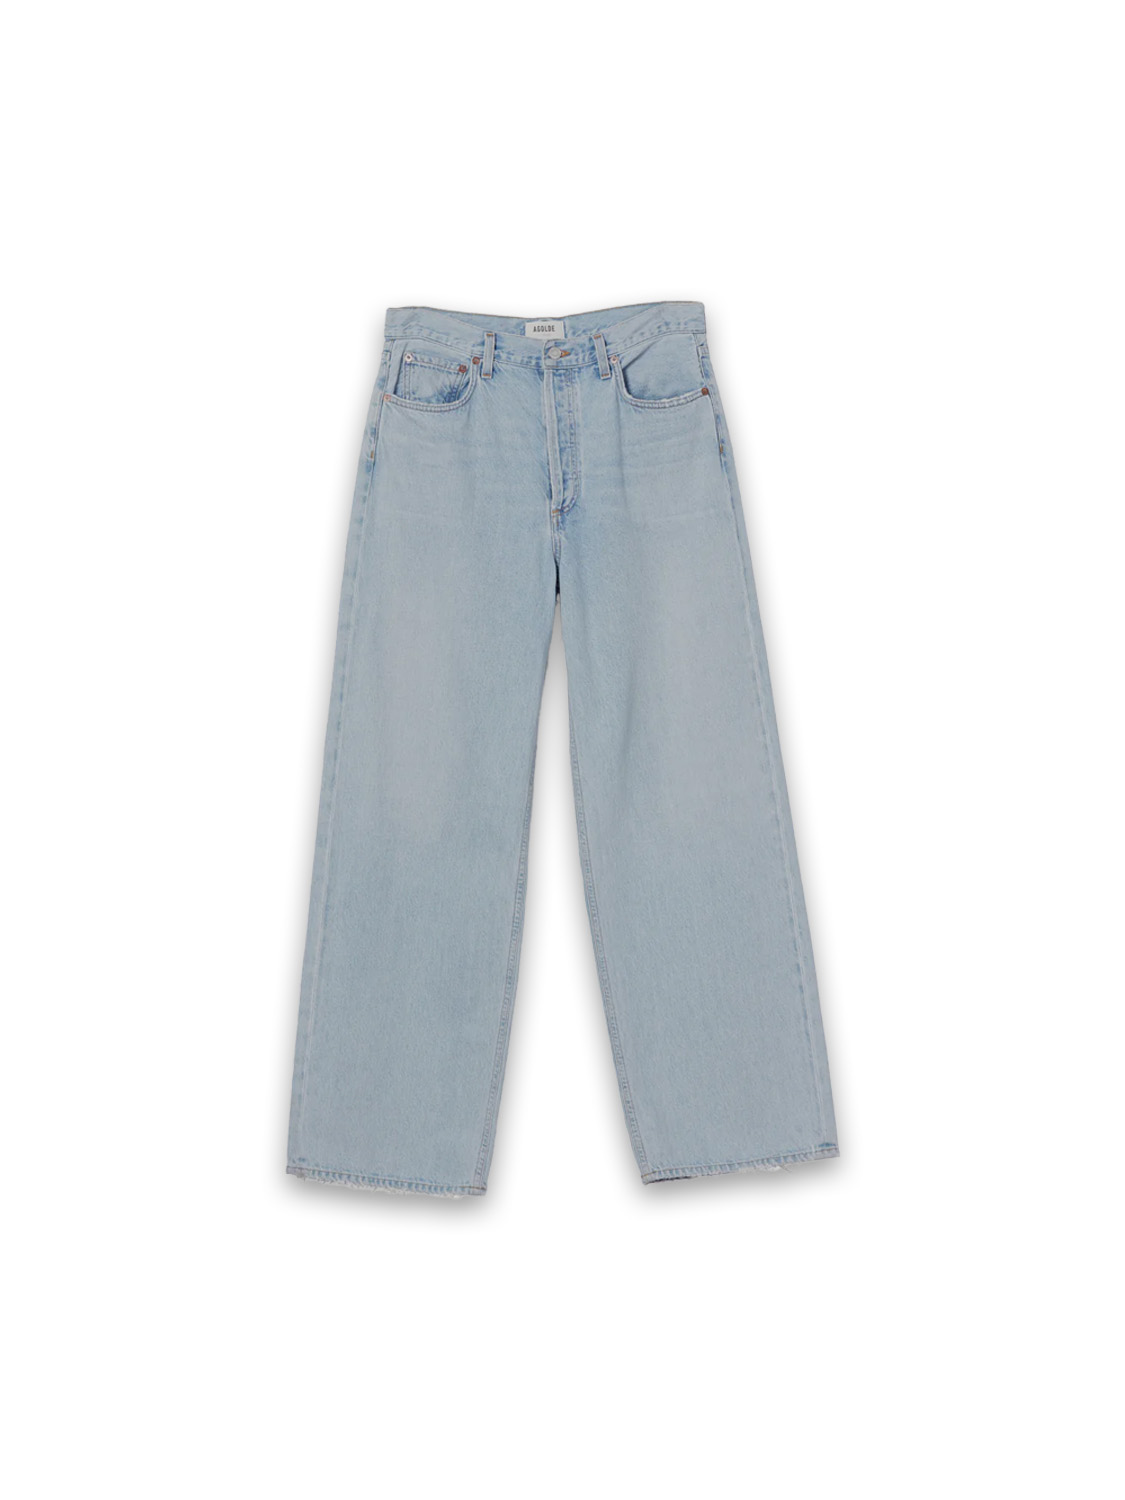 Low Slung Baggy – Relaxed Fit Jeans  